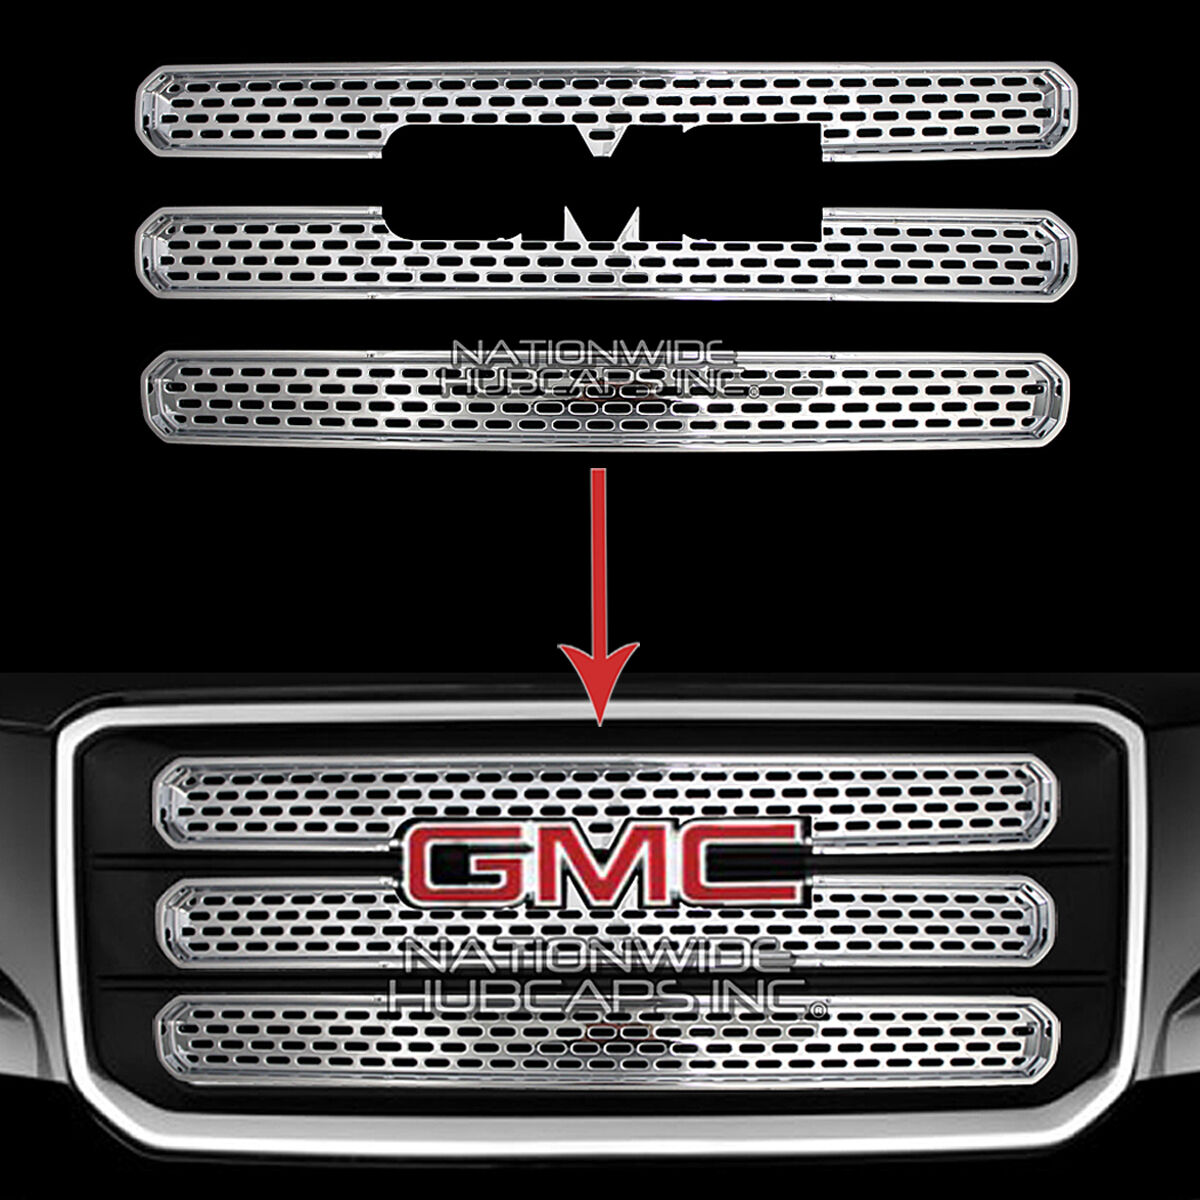 13-16 GMC ACADIA CHROME Snap On Grille Overlay 3 Bar Front Grill Covers Inserts